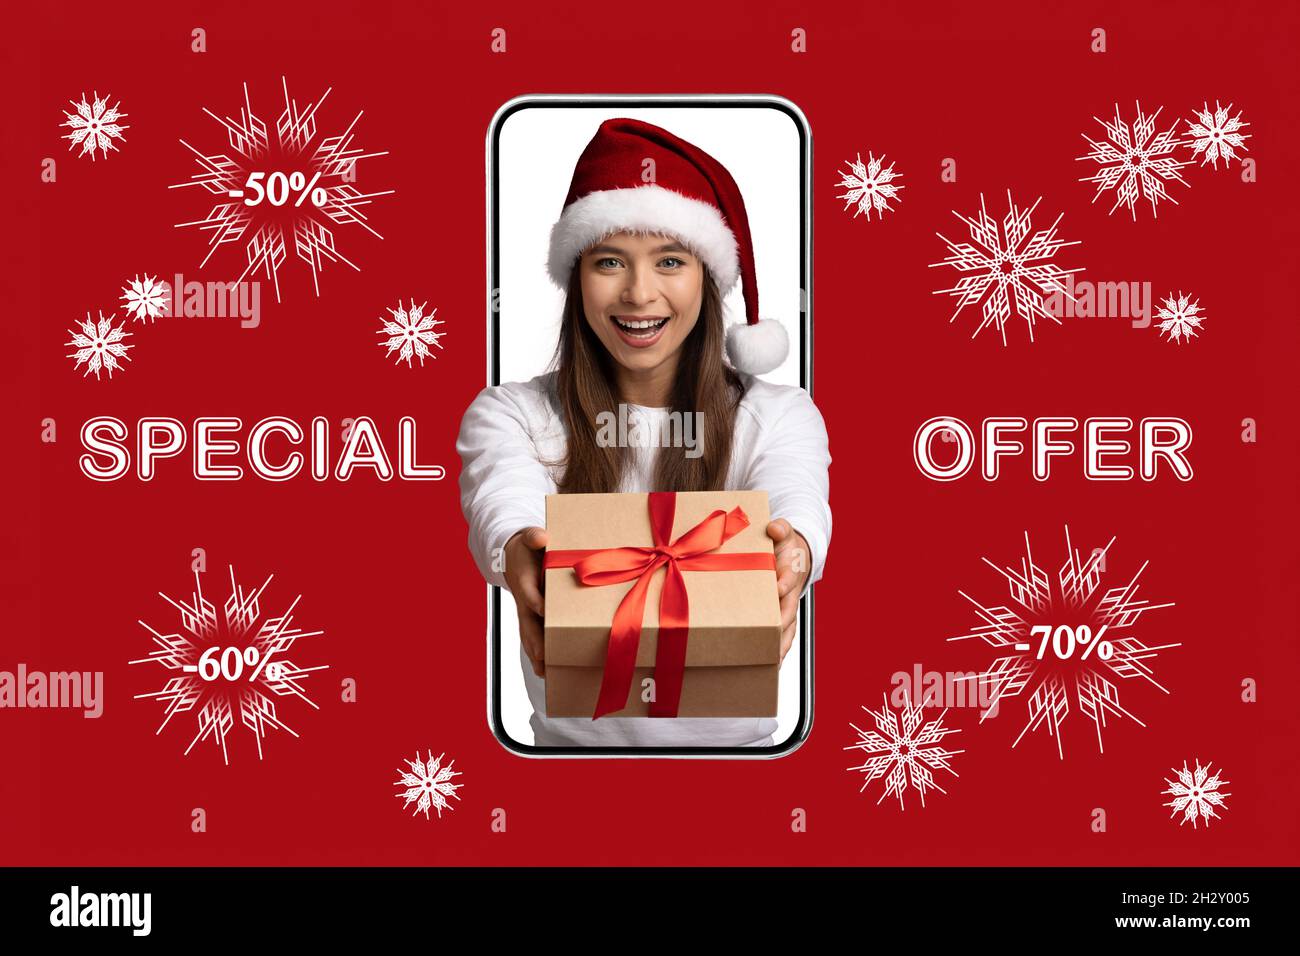 Special Offer. Woman Holding Gift Box Peeking Out Of Big Smartphone Screen Stock Photo